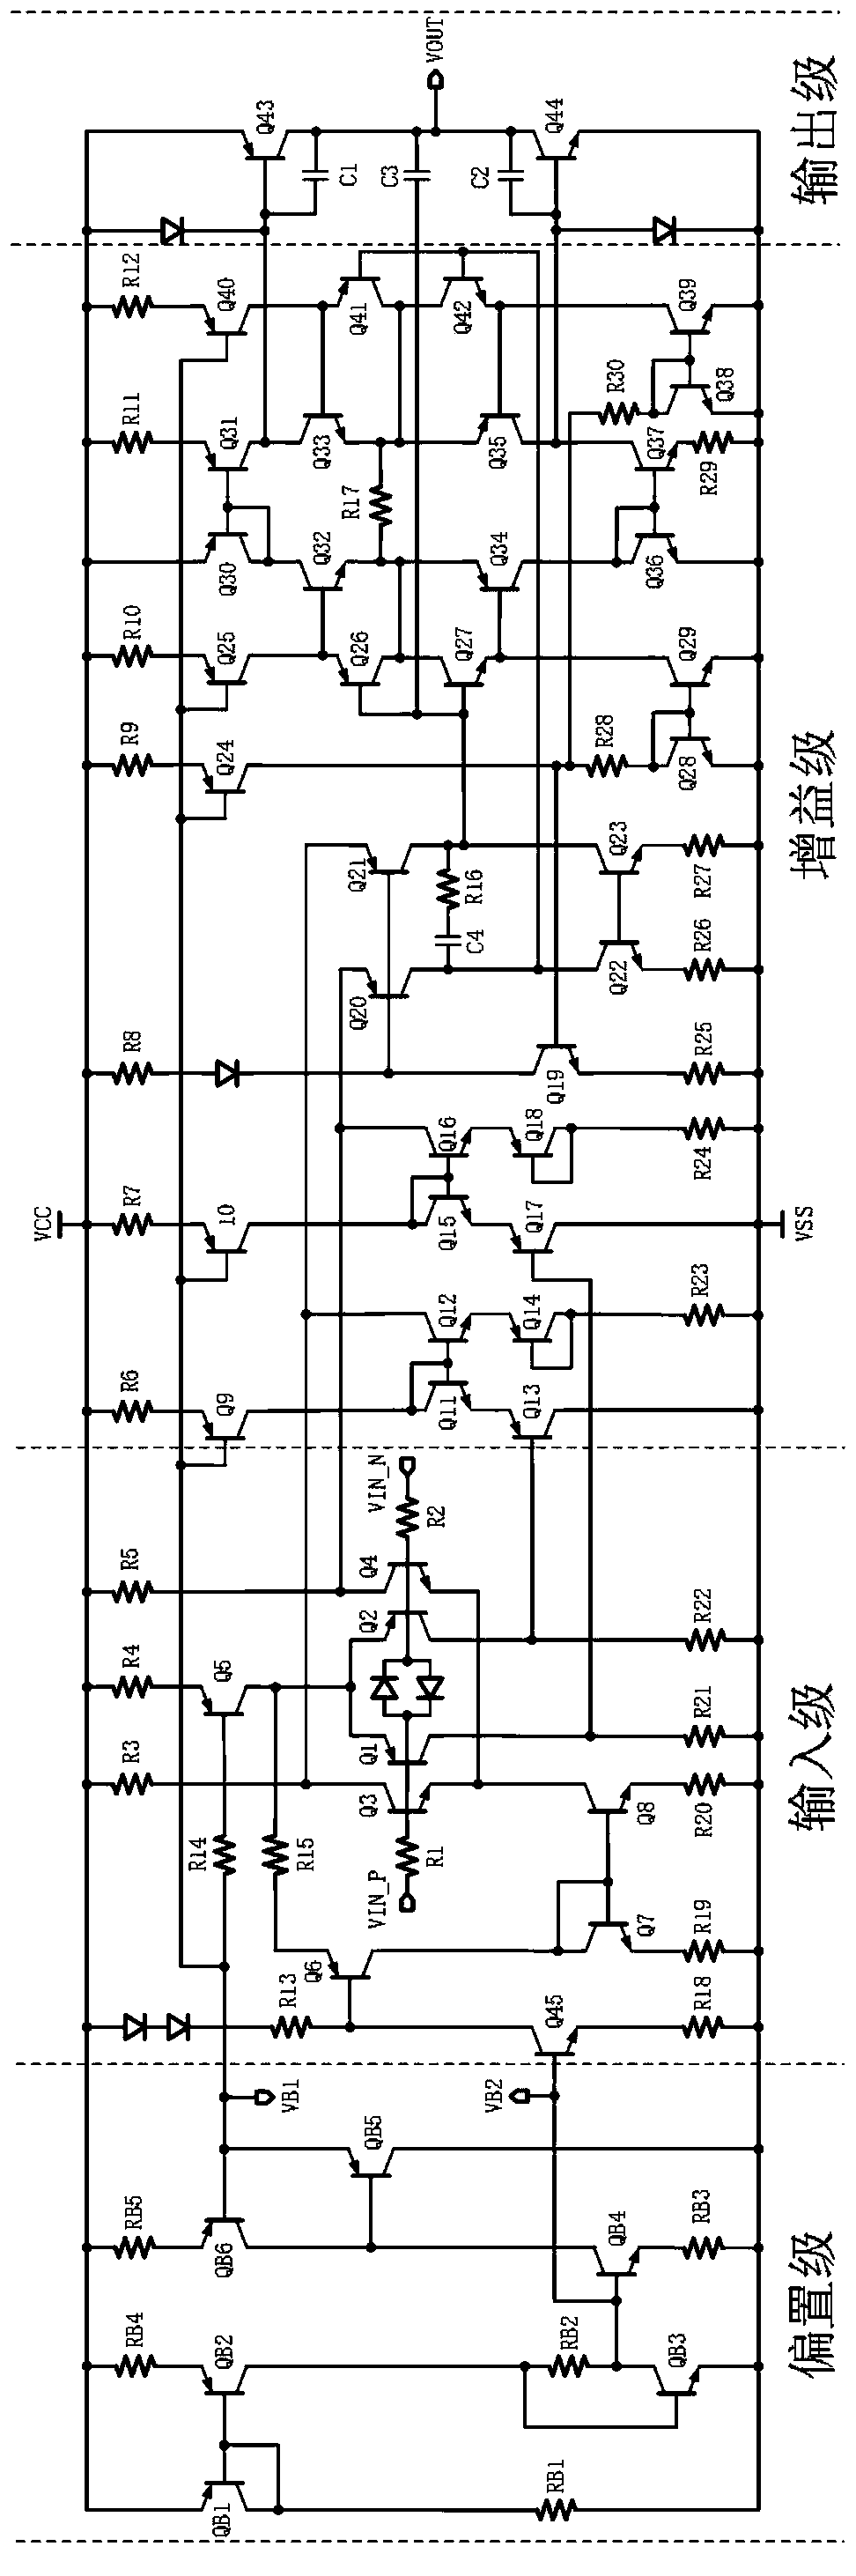 Rail-to-rail input and output operational amplifier based on bipolar process